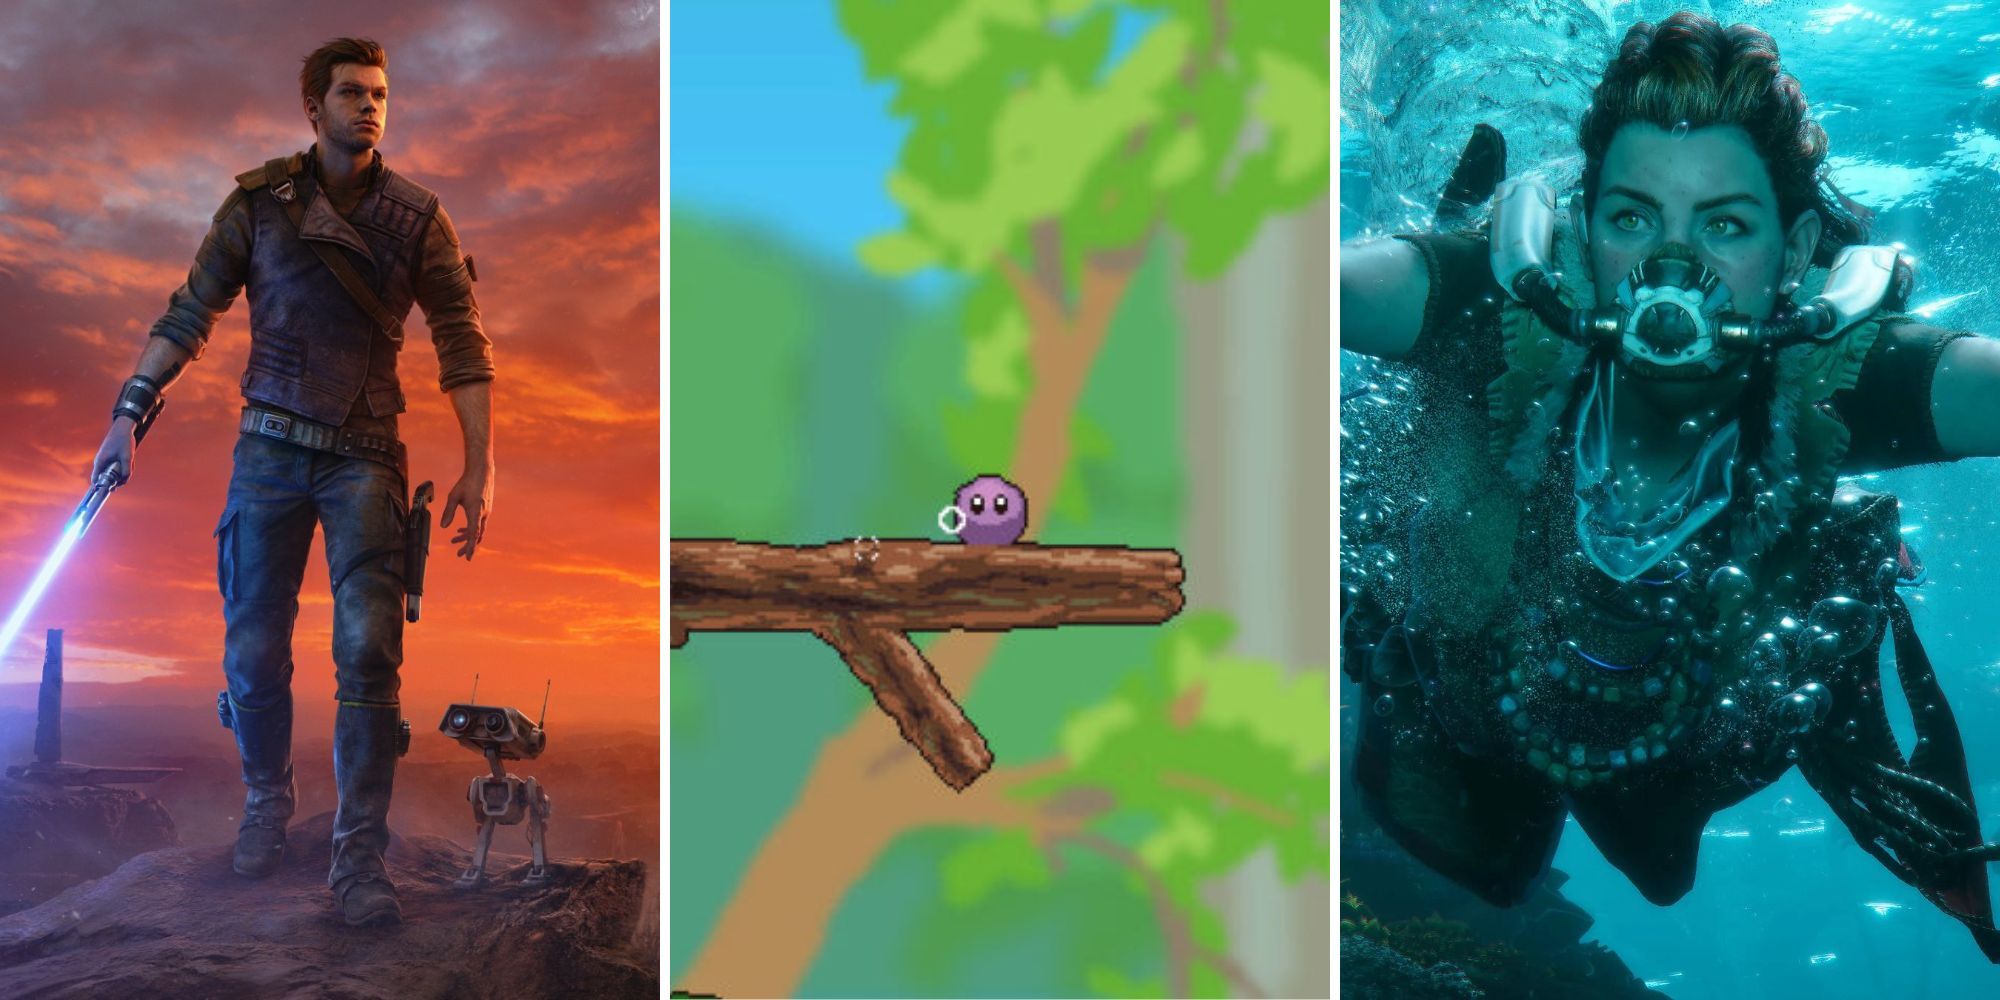 A collage in which Cal Kestis walks with his lightsaber, Buddy sits on a branch, and Aloy swims through the ocean.